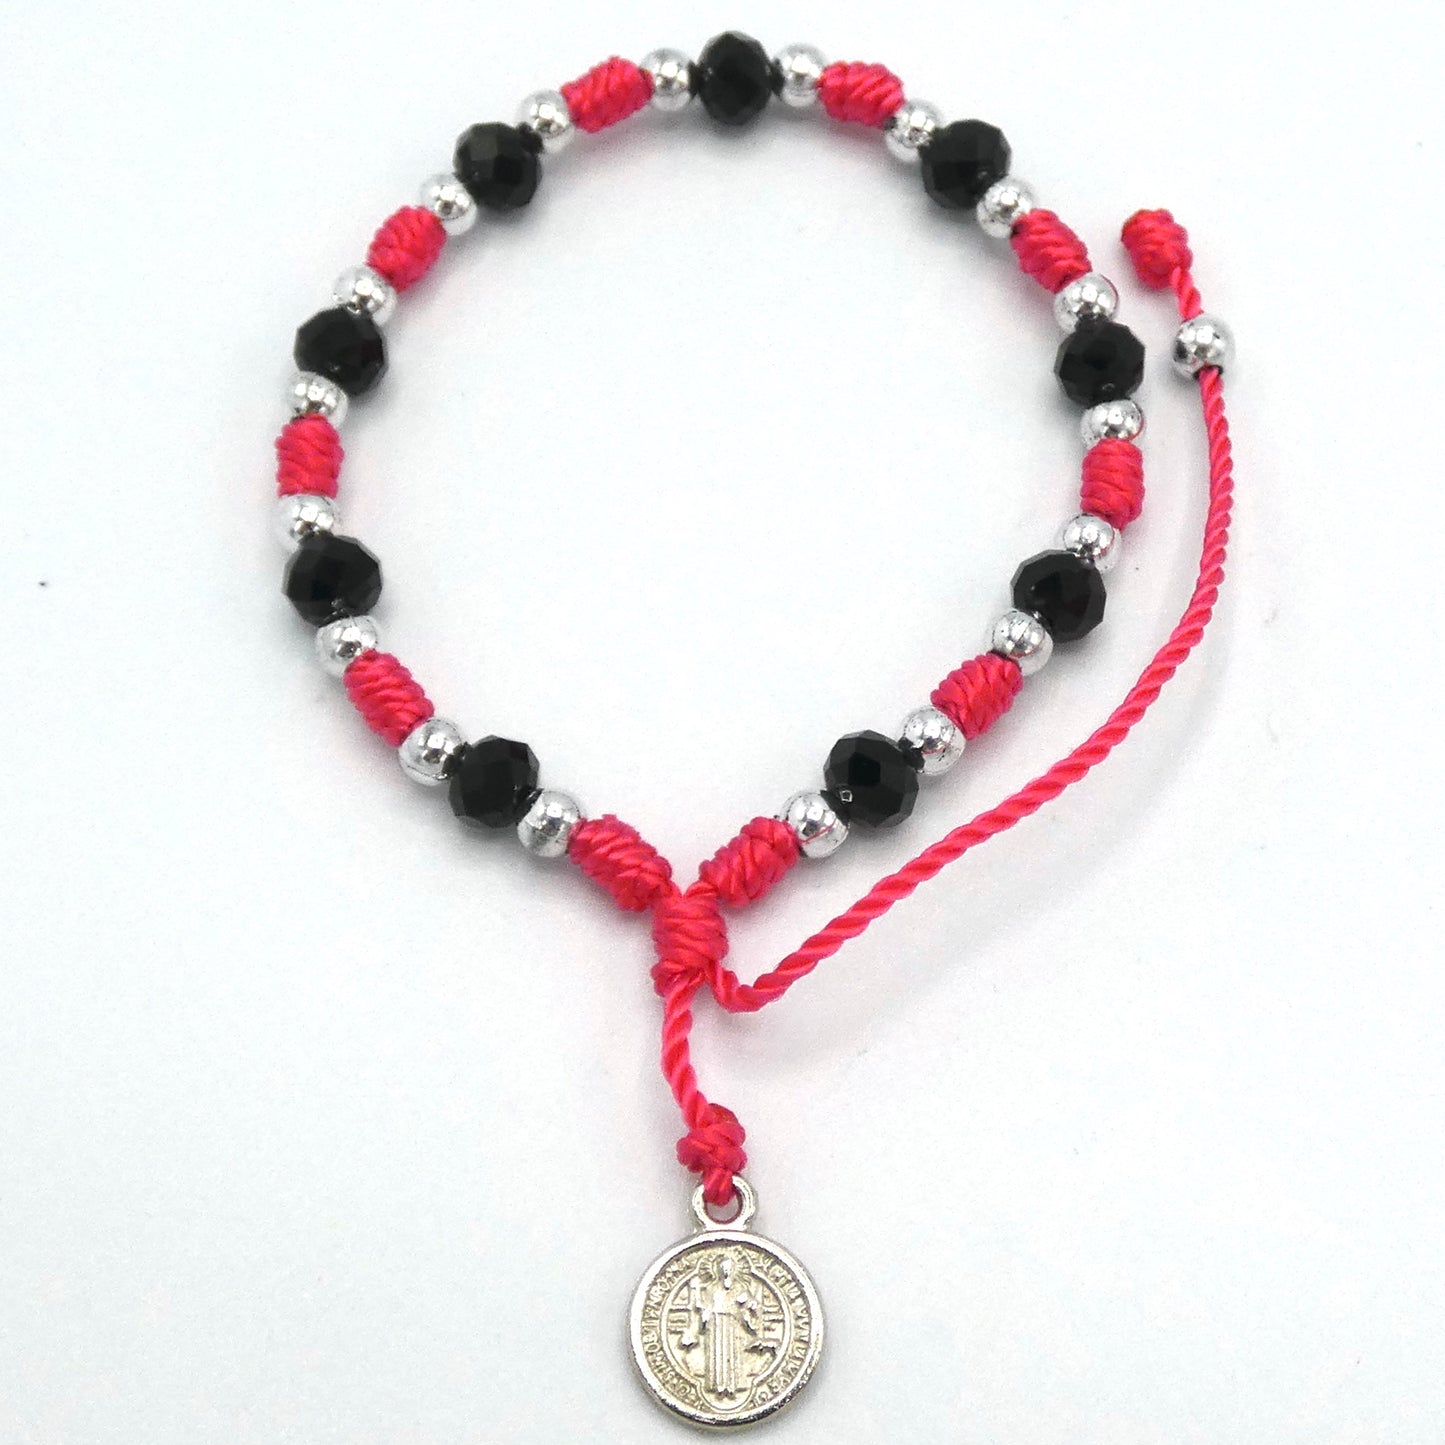 Mexican St. Benedict Decade Rosary Bracelet of Assorted Colors